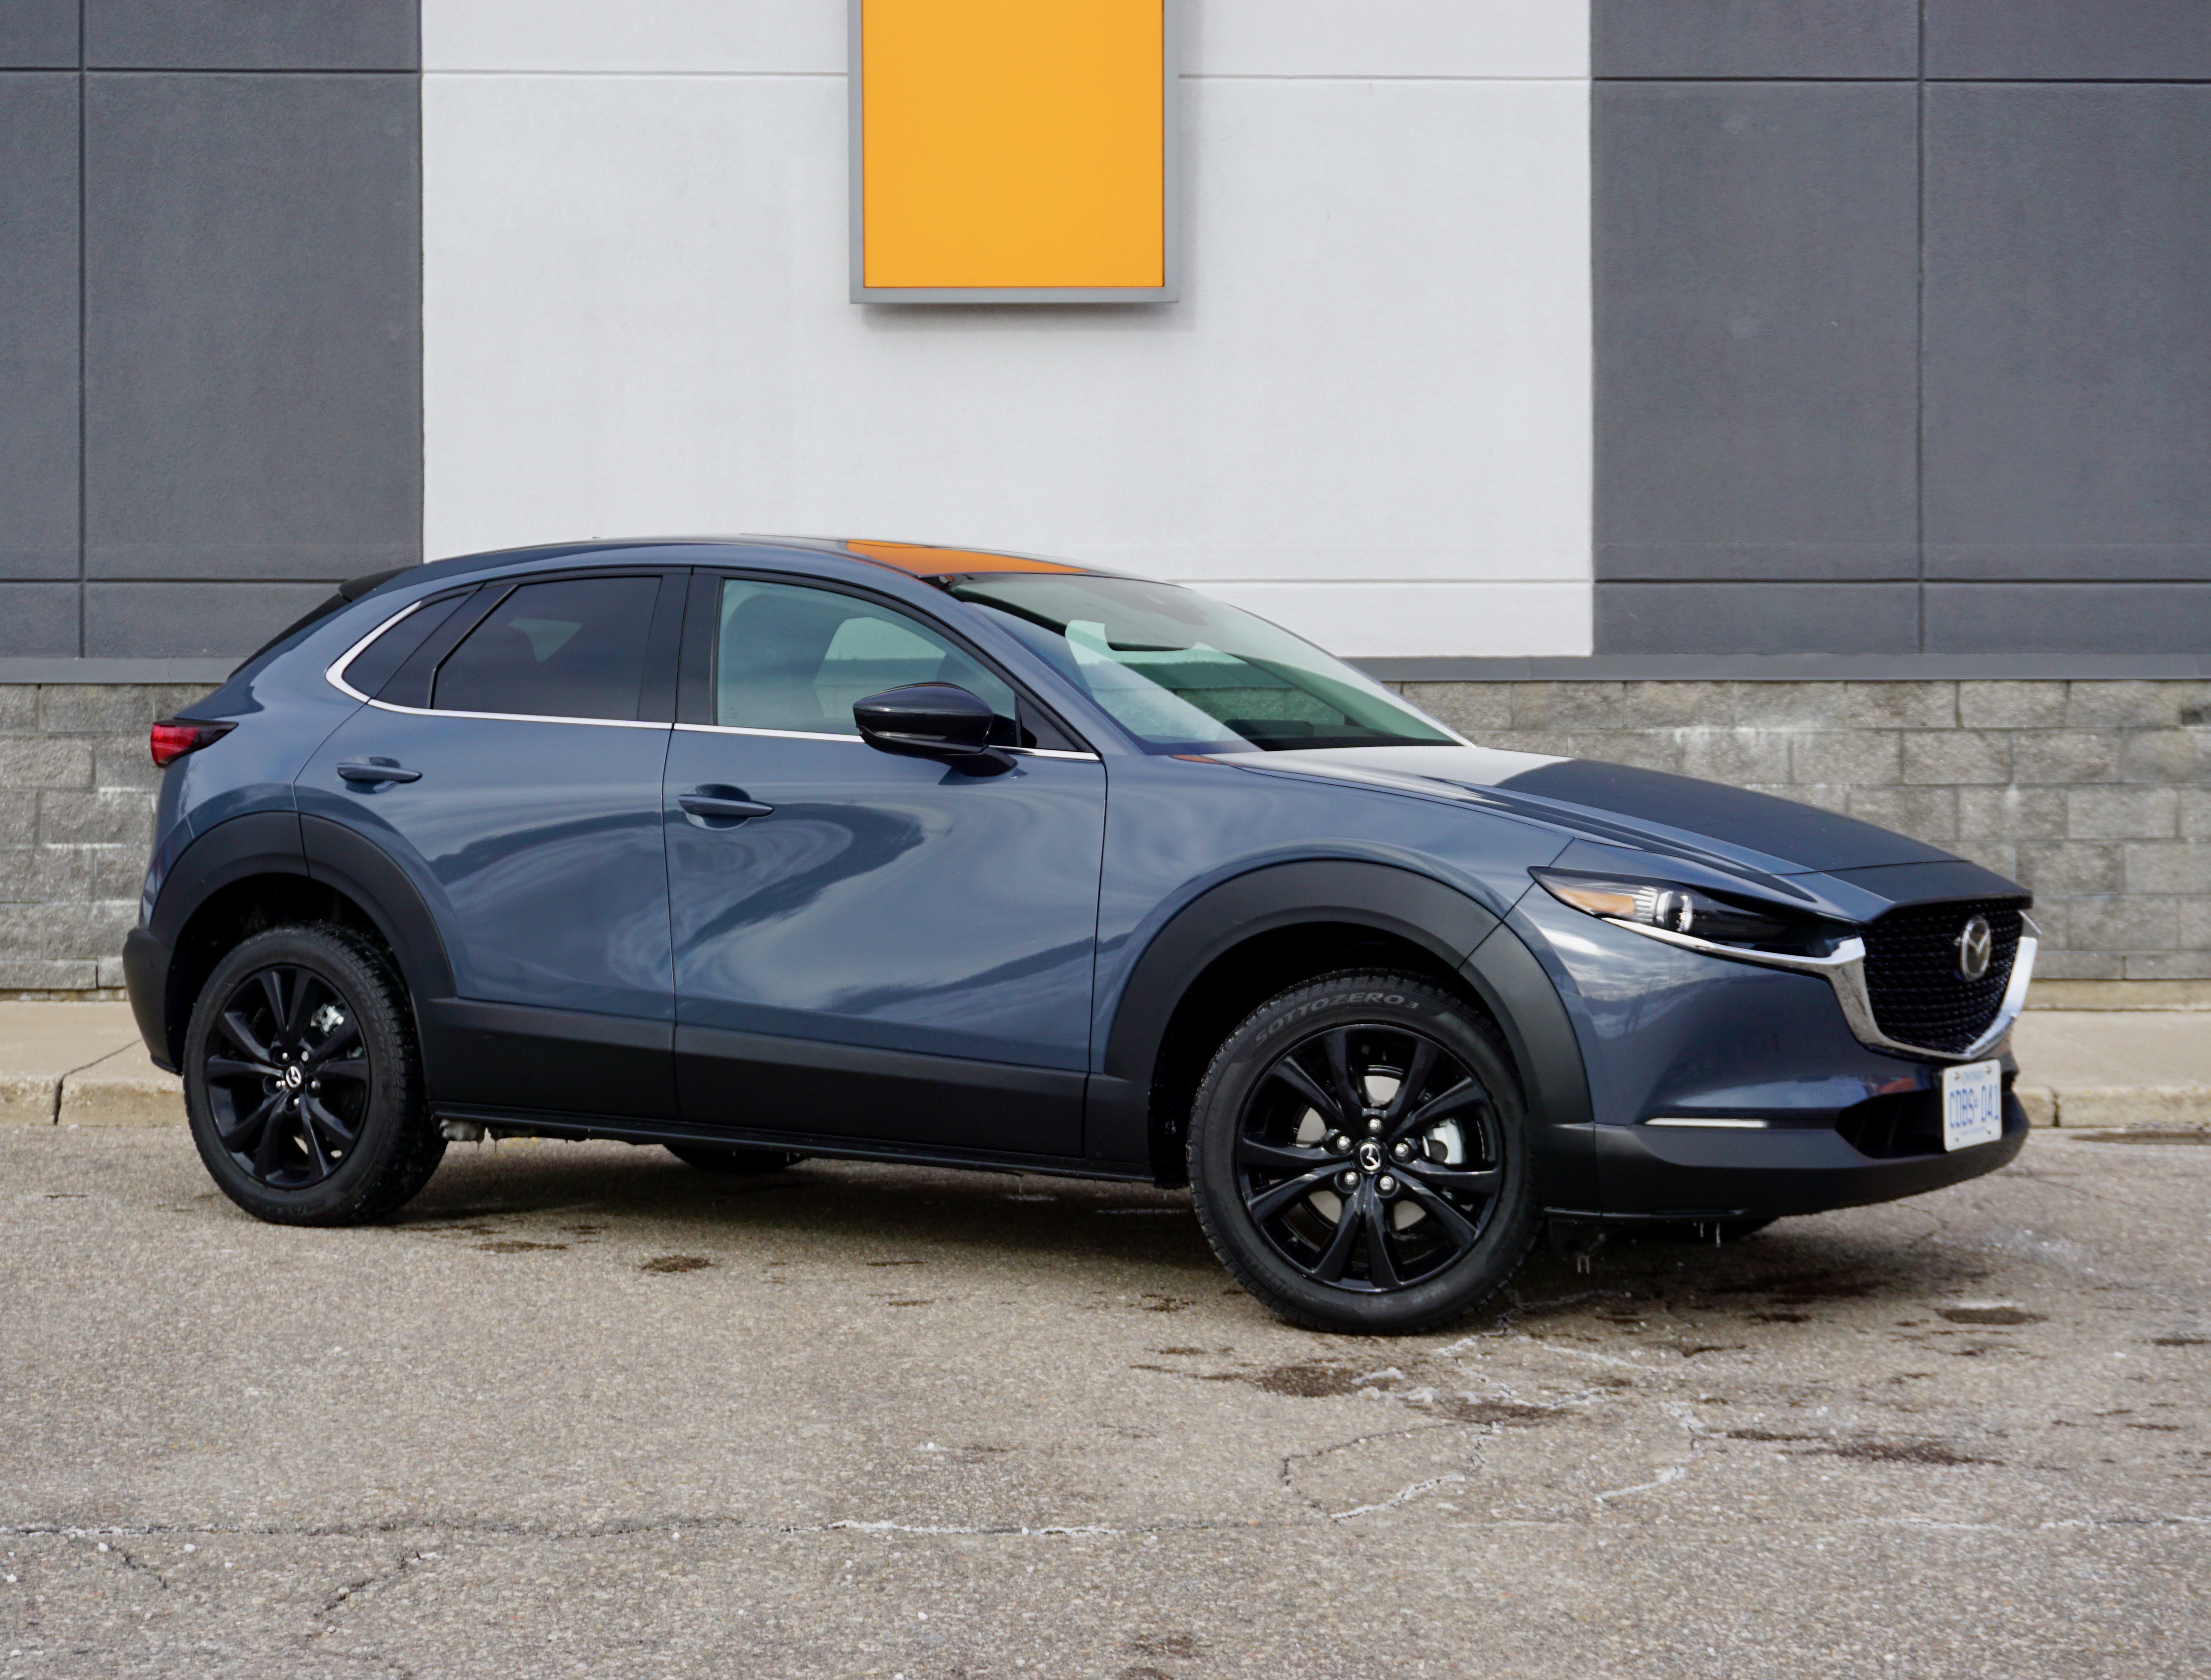 Mazda CX-30 review: A crossover with ideal balance